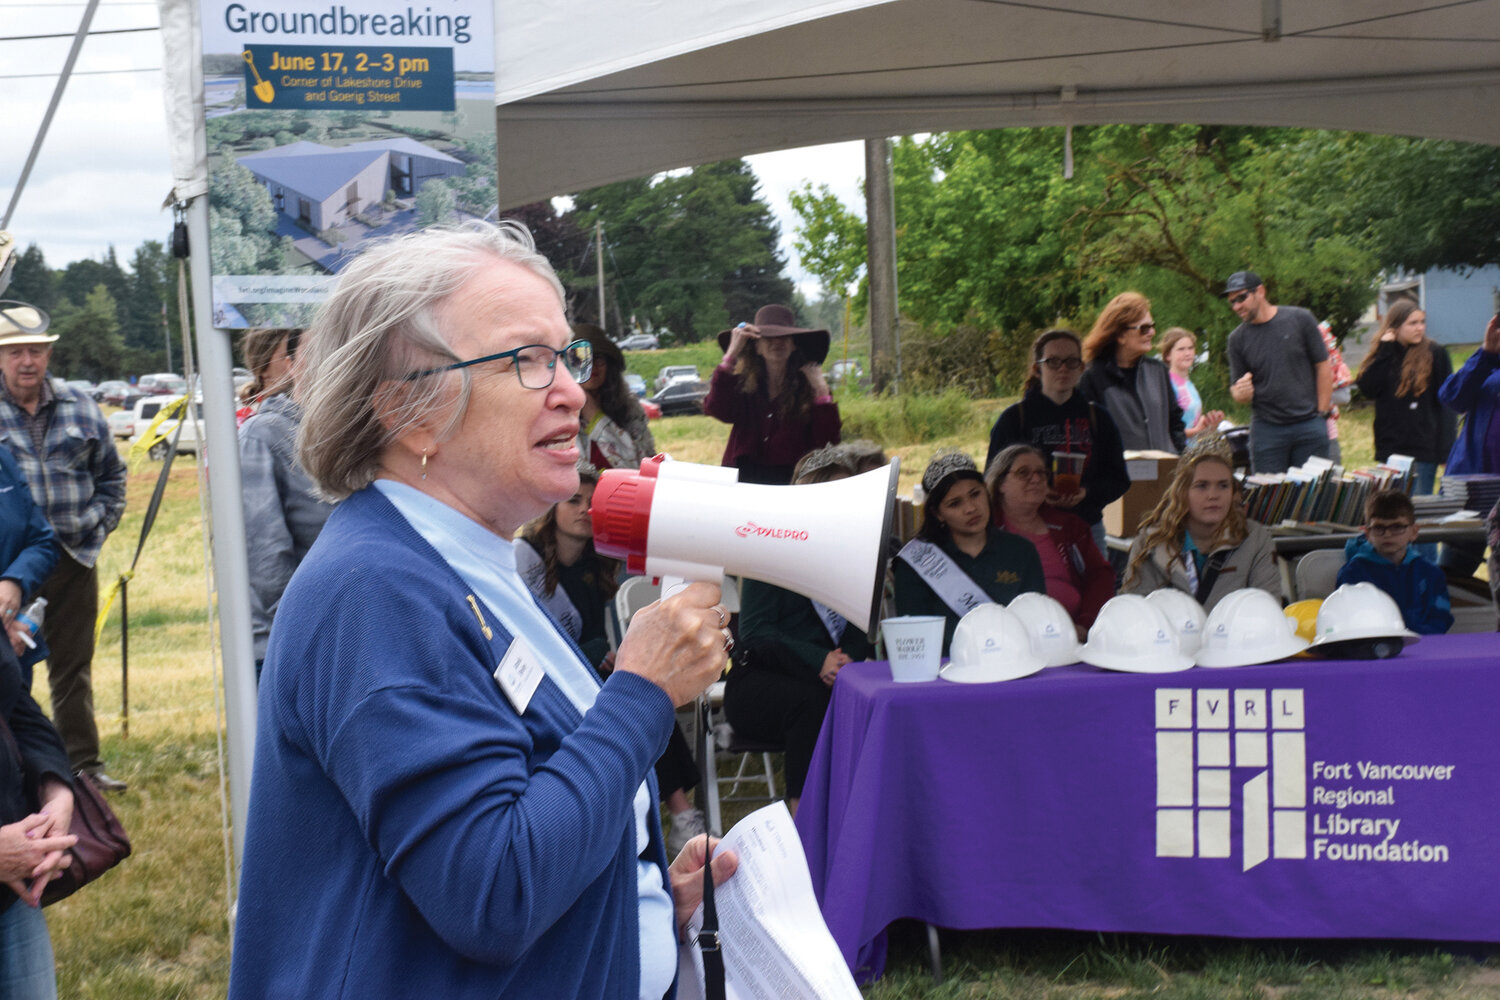 Amelia Shelley, the executive director of the Fort Vancouver Regional Library system, speaks among a crowd gathered for the groundbreaking of the Woodland Community Library on June 17.